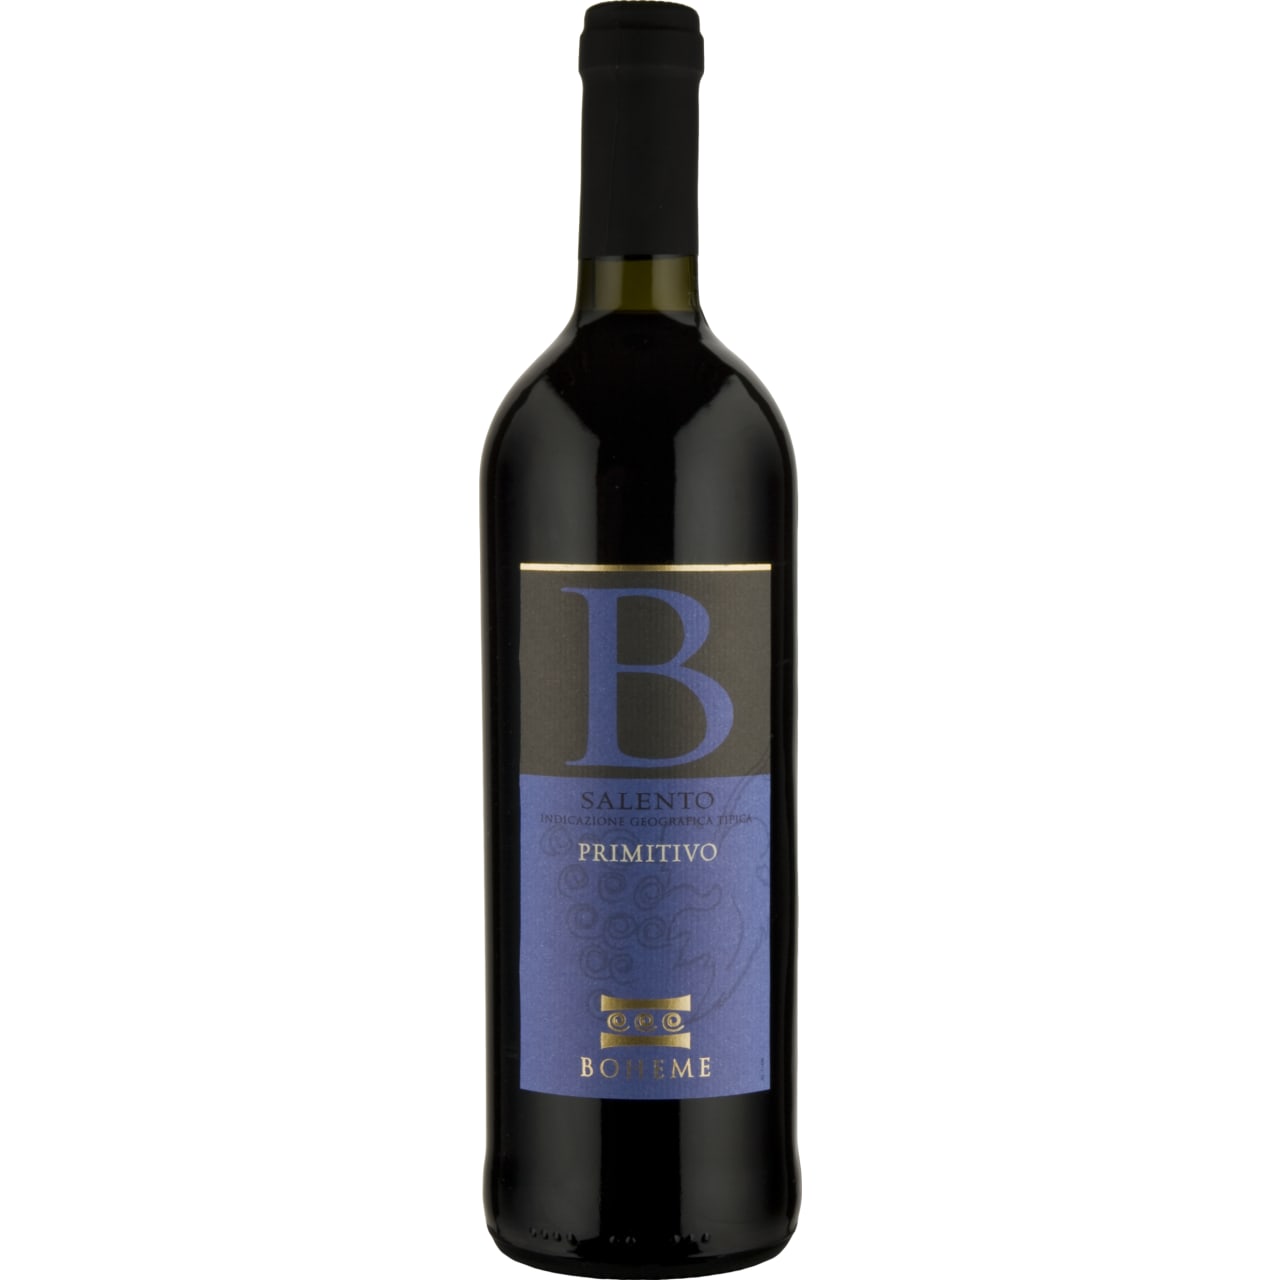 Primitivo Salento from Boheme is a medium bodied, fresh and fruit-forward red wine.